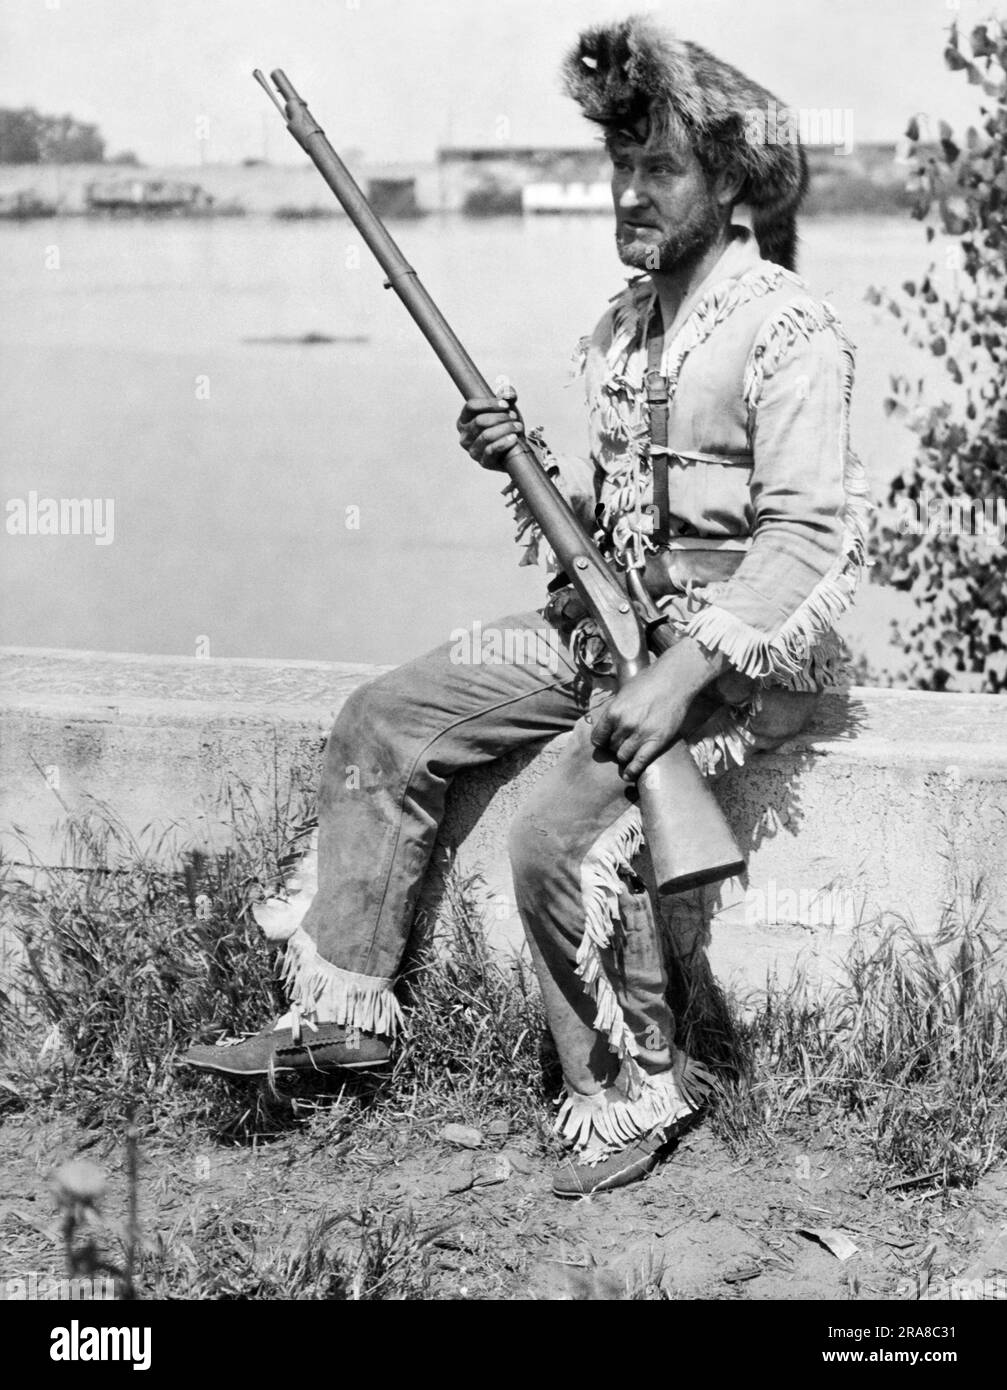 United States:  c. 1928 A man wearing a Davy Crockett outfit with a coonskin cap and a musket. Stock Photo